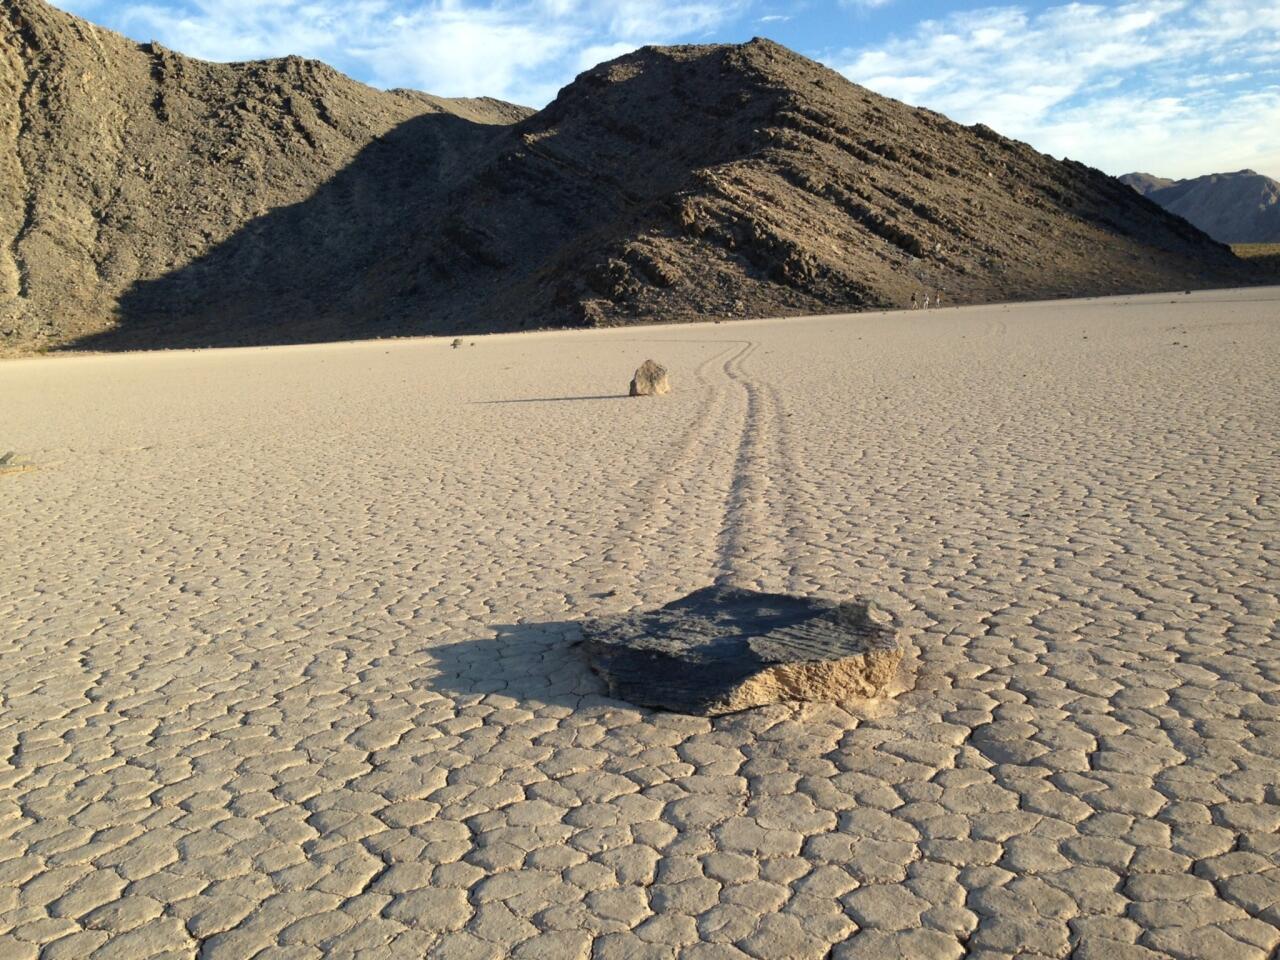 Newly published findings resolve the mystery of the moving rocks like this one that have left trails on the Racetrack playa in Death Valley National Park.